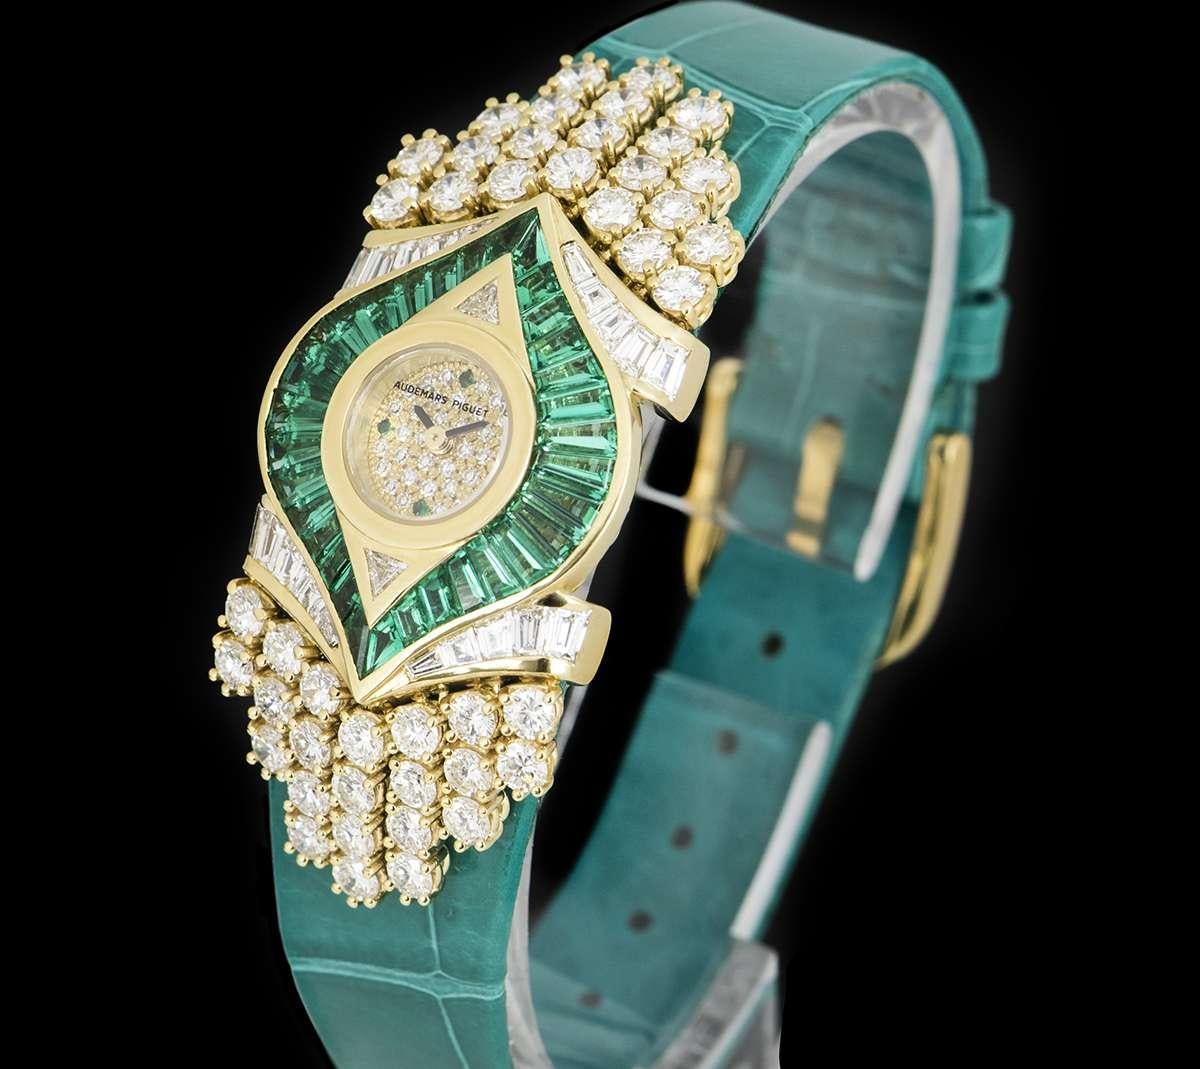 An Unworn Rare 18k Yellow Gold Diamond & Emerald Set NOS Ladies Dress Wristwatch, pave diamond dial with 4 emerald hour markers, a fixed 18k yellow gold bezel set with 2 trillion cut diamonds (~0.1ct), an 18k yellow gold case set with approximately